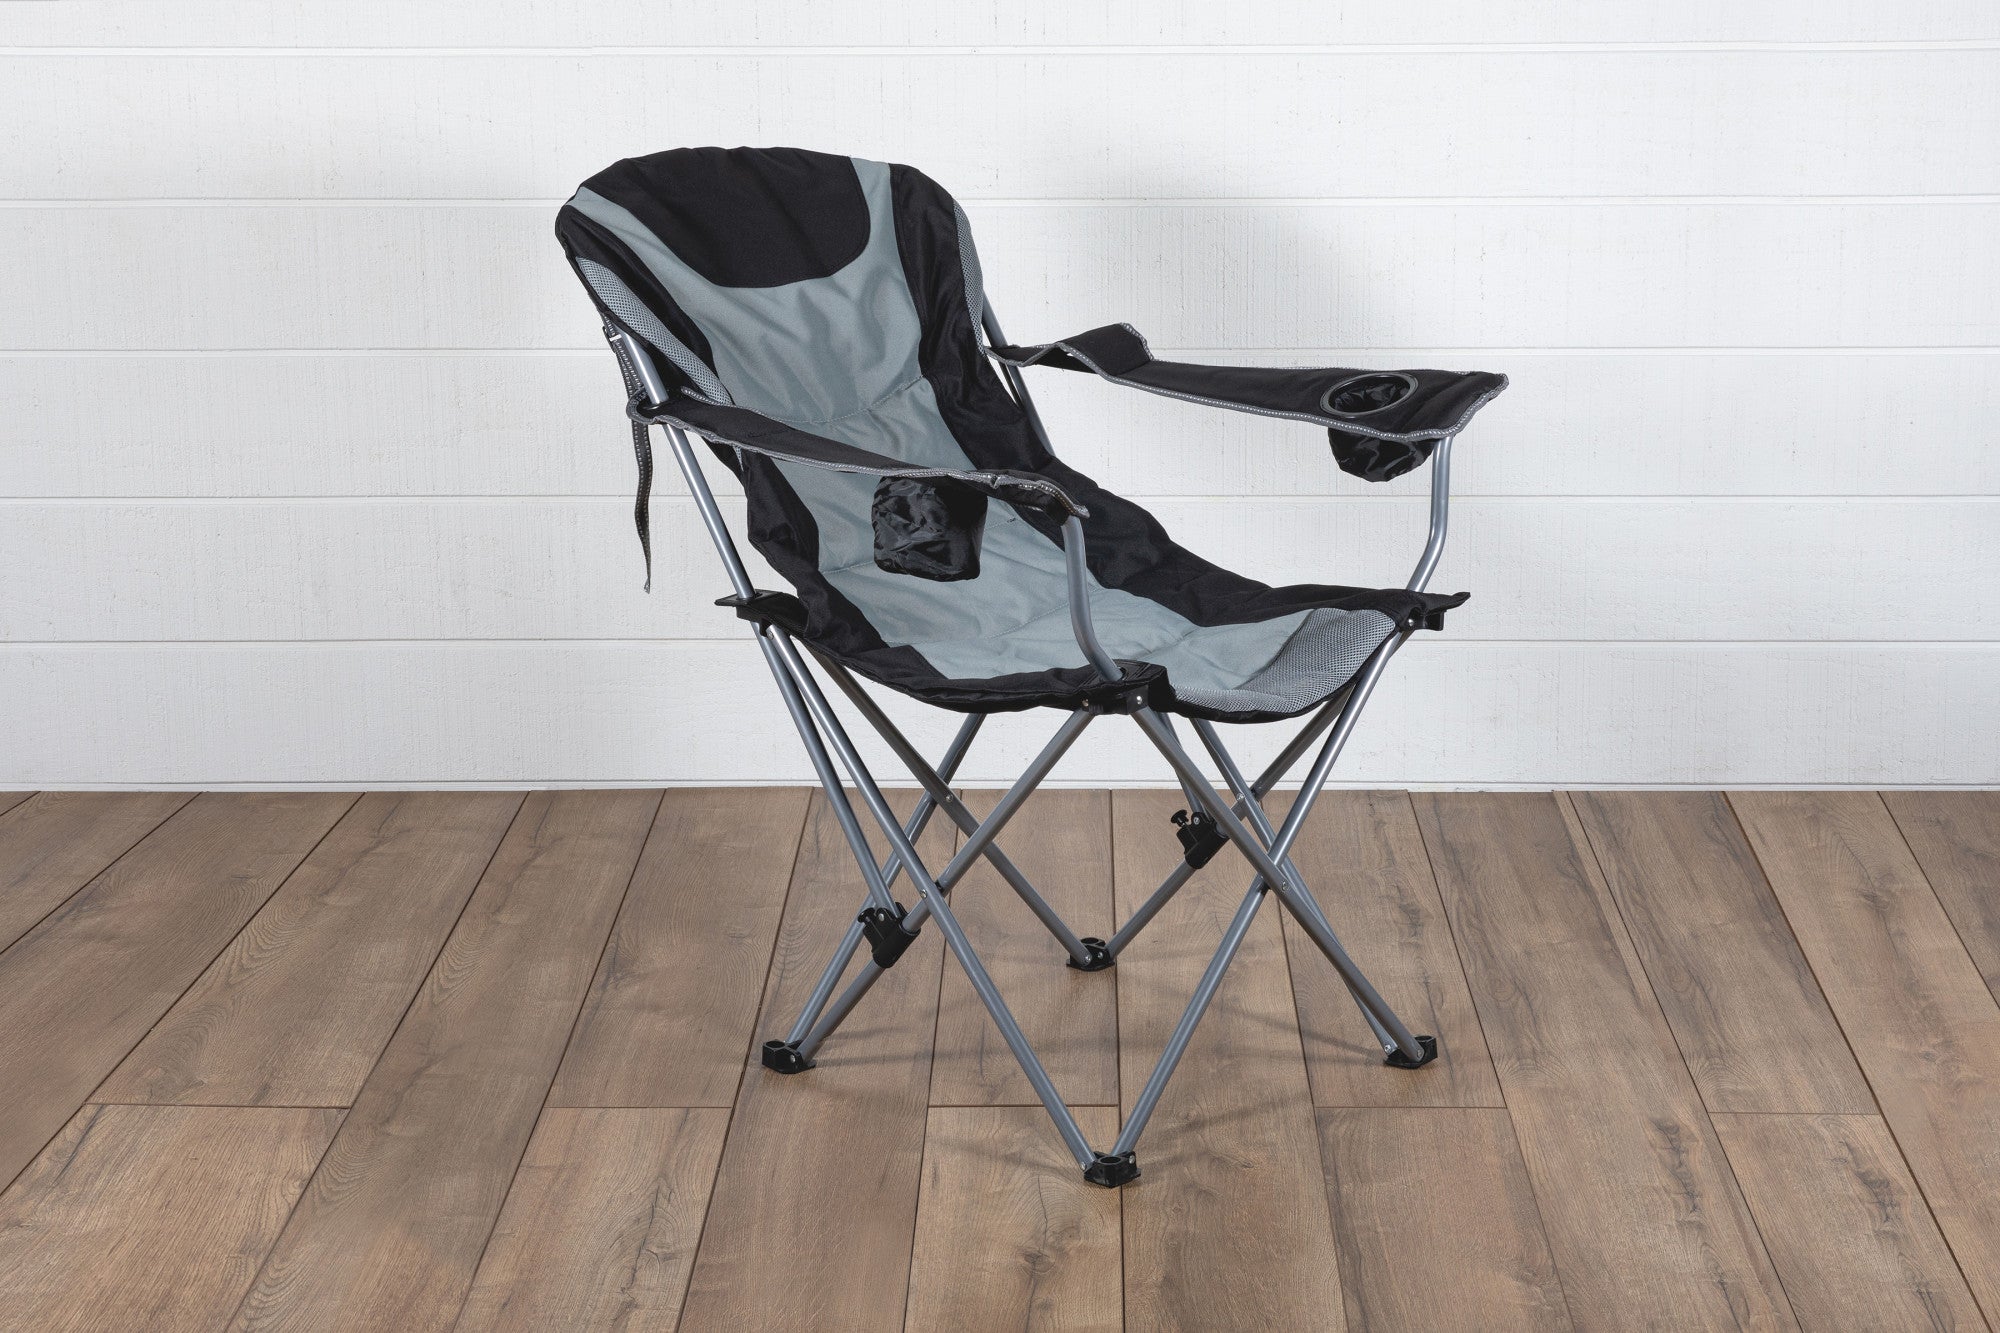 Wake Forest Demon Deacons - Reclining Camp Chair